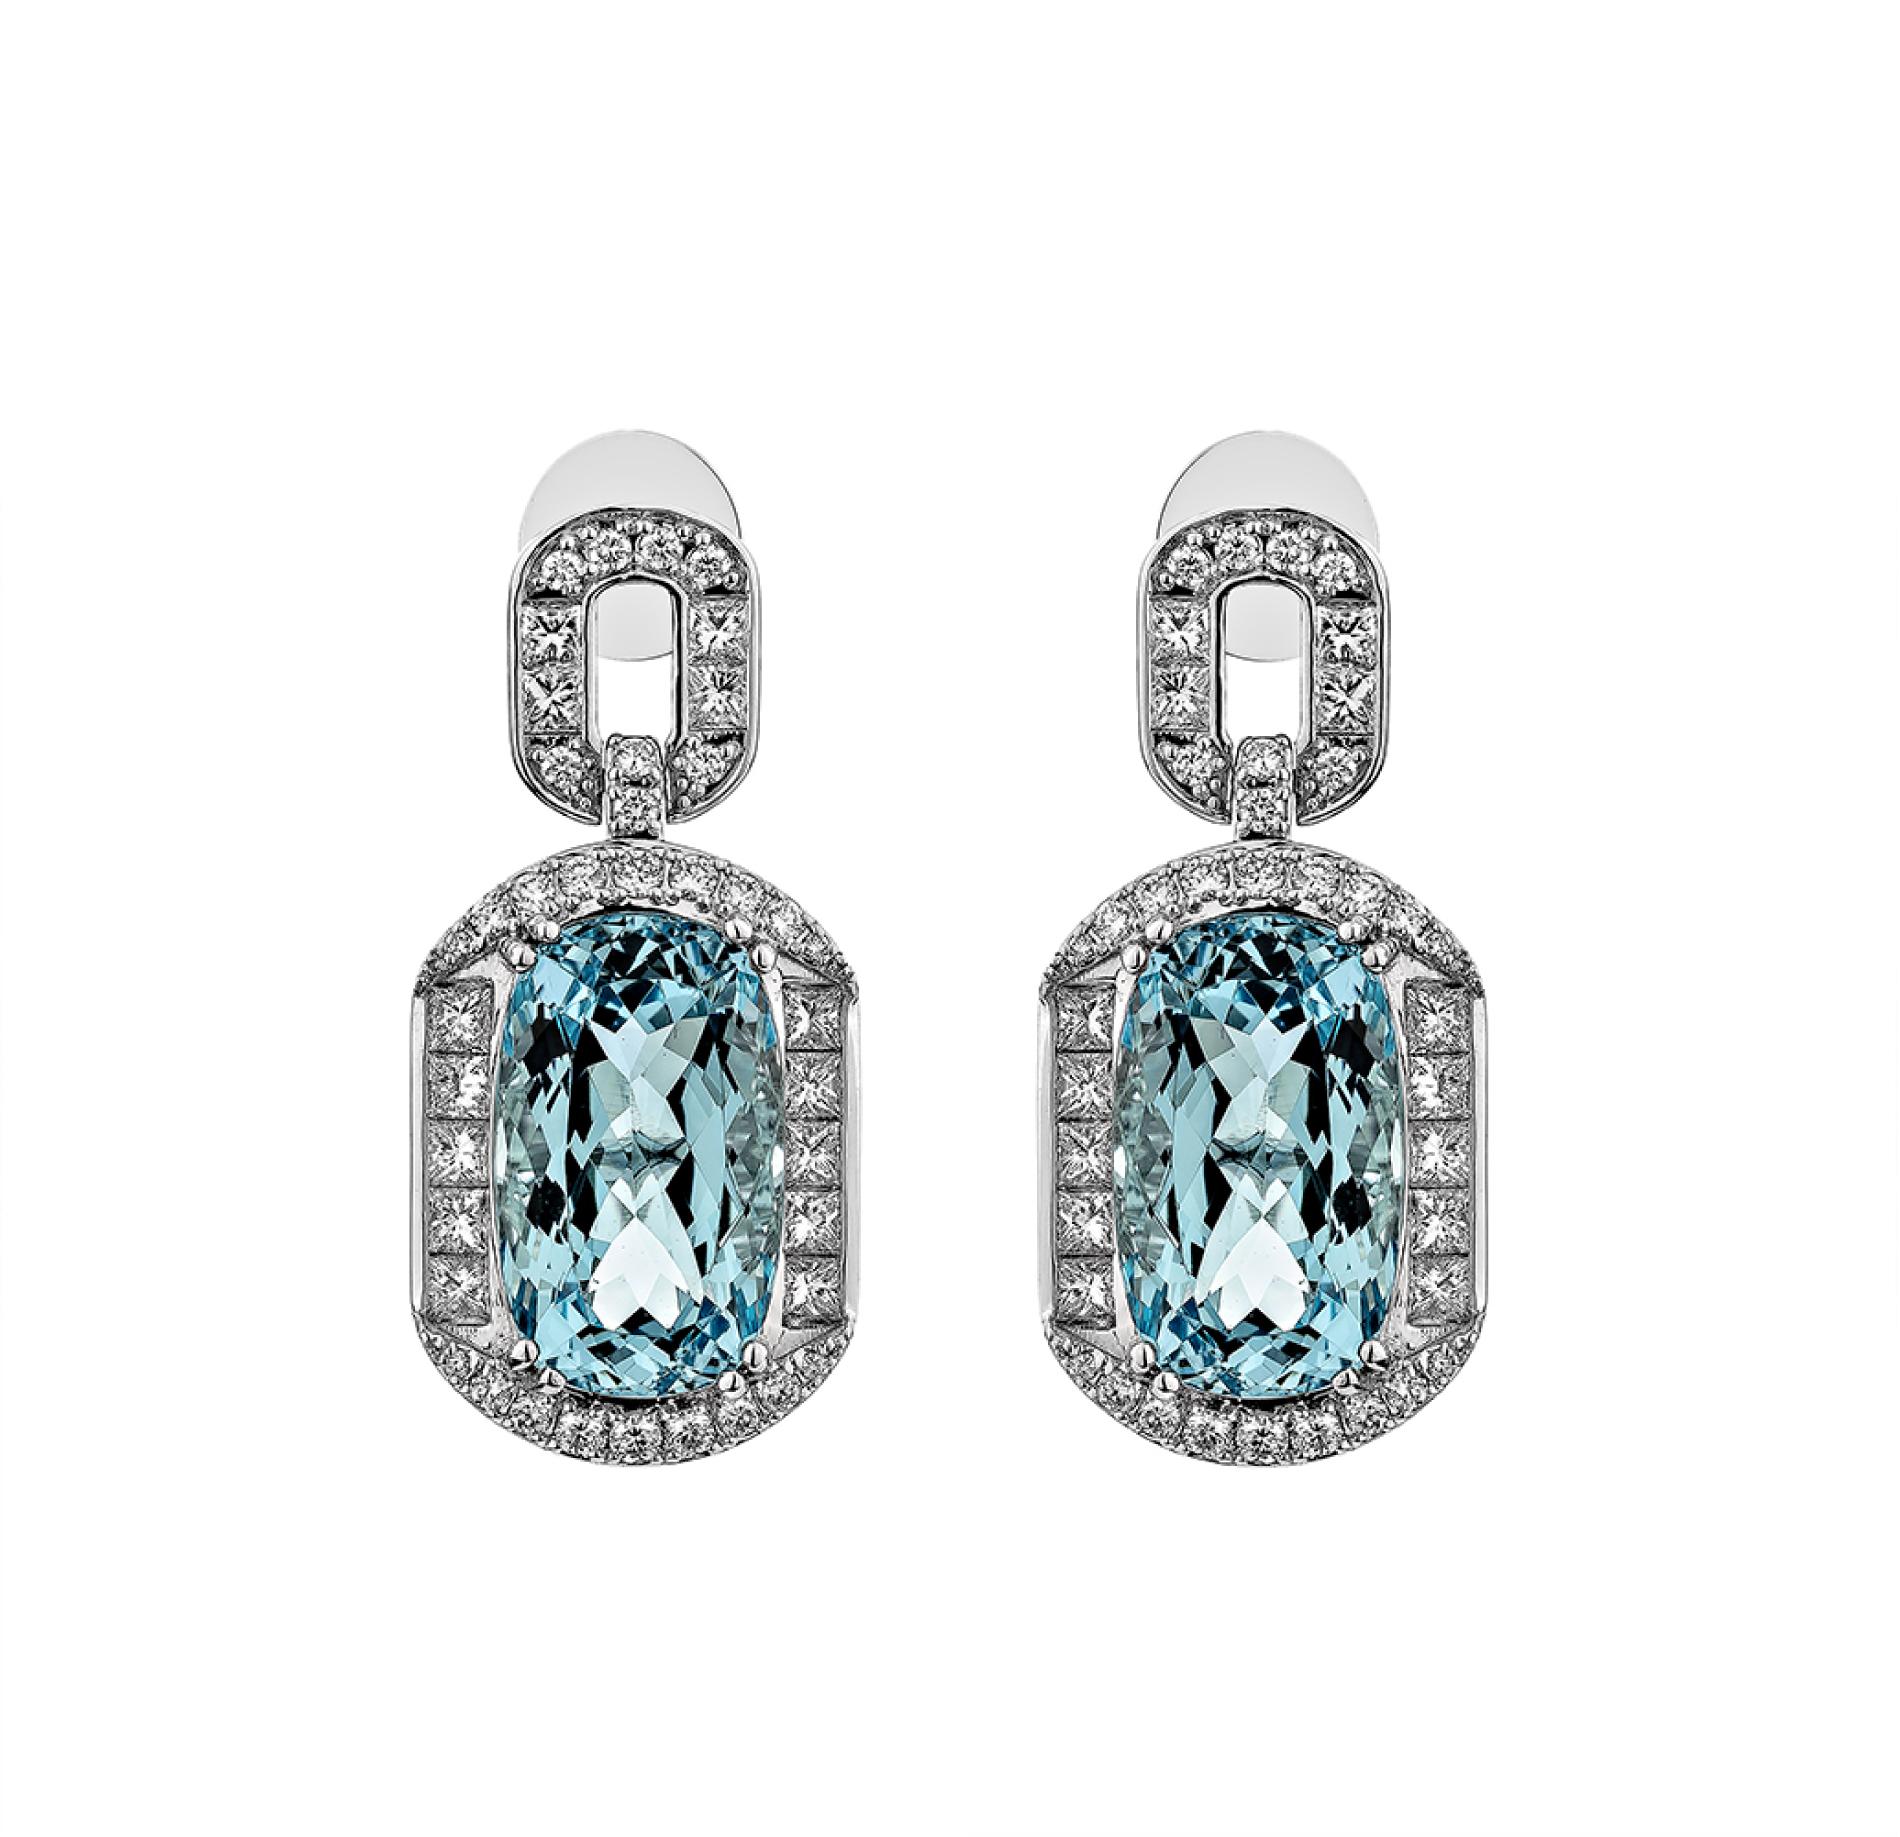 Contemporary 16.369 Carat Aquamarine Drop Earring in 18Karat Whtie Gold With White Diamond. For Sale